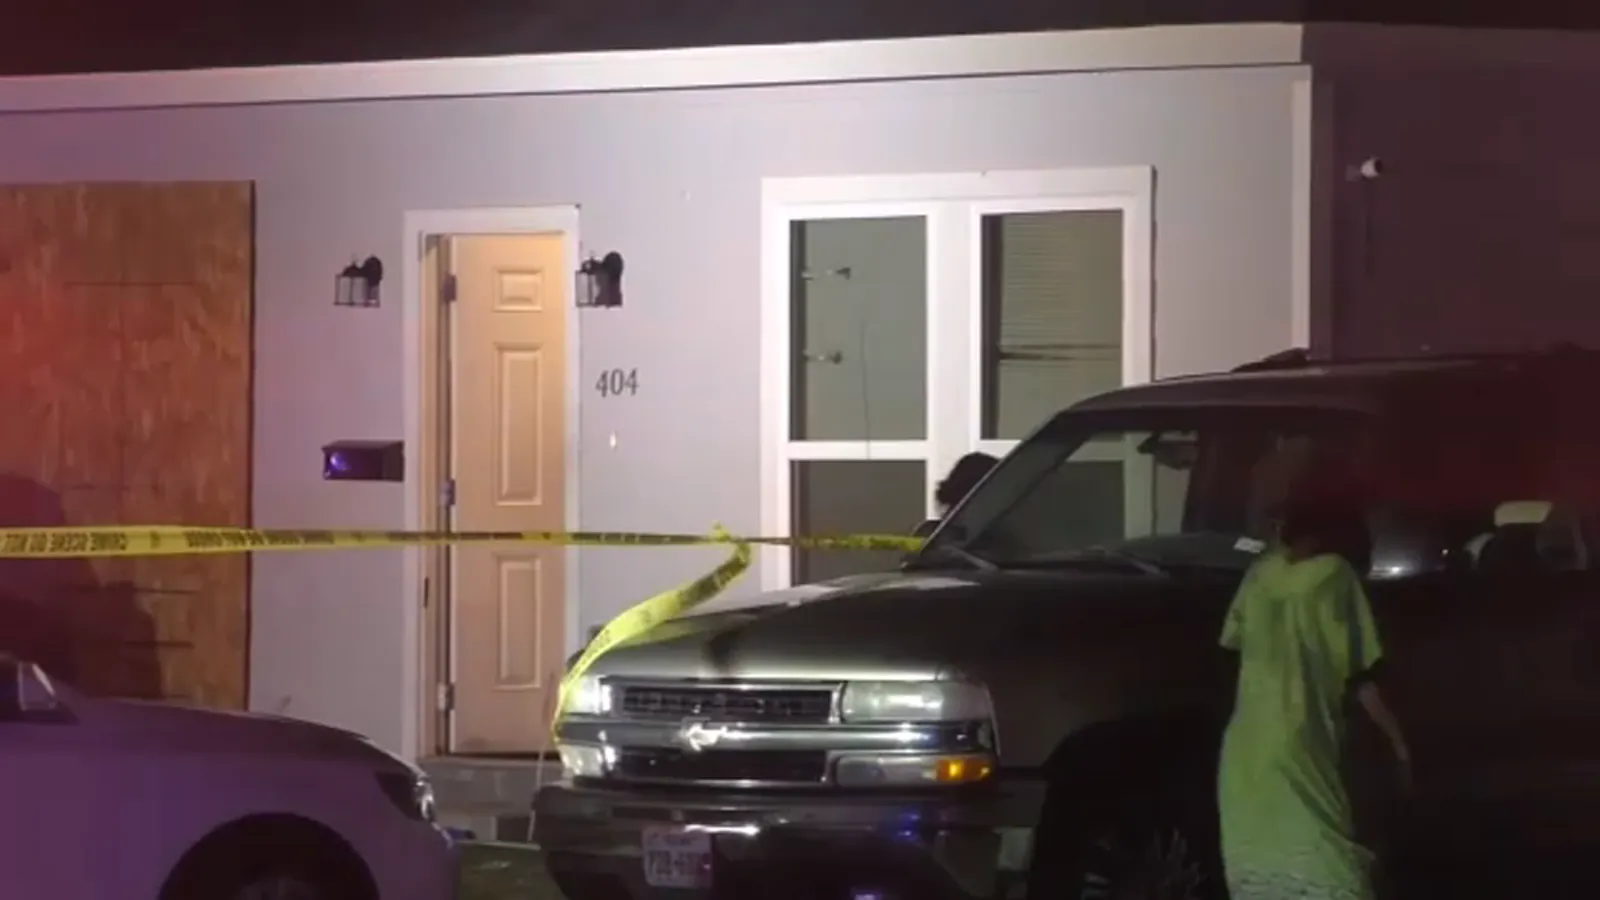 17-year-old Texas City High School student shot inside home in La Marque, police say